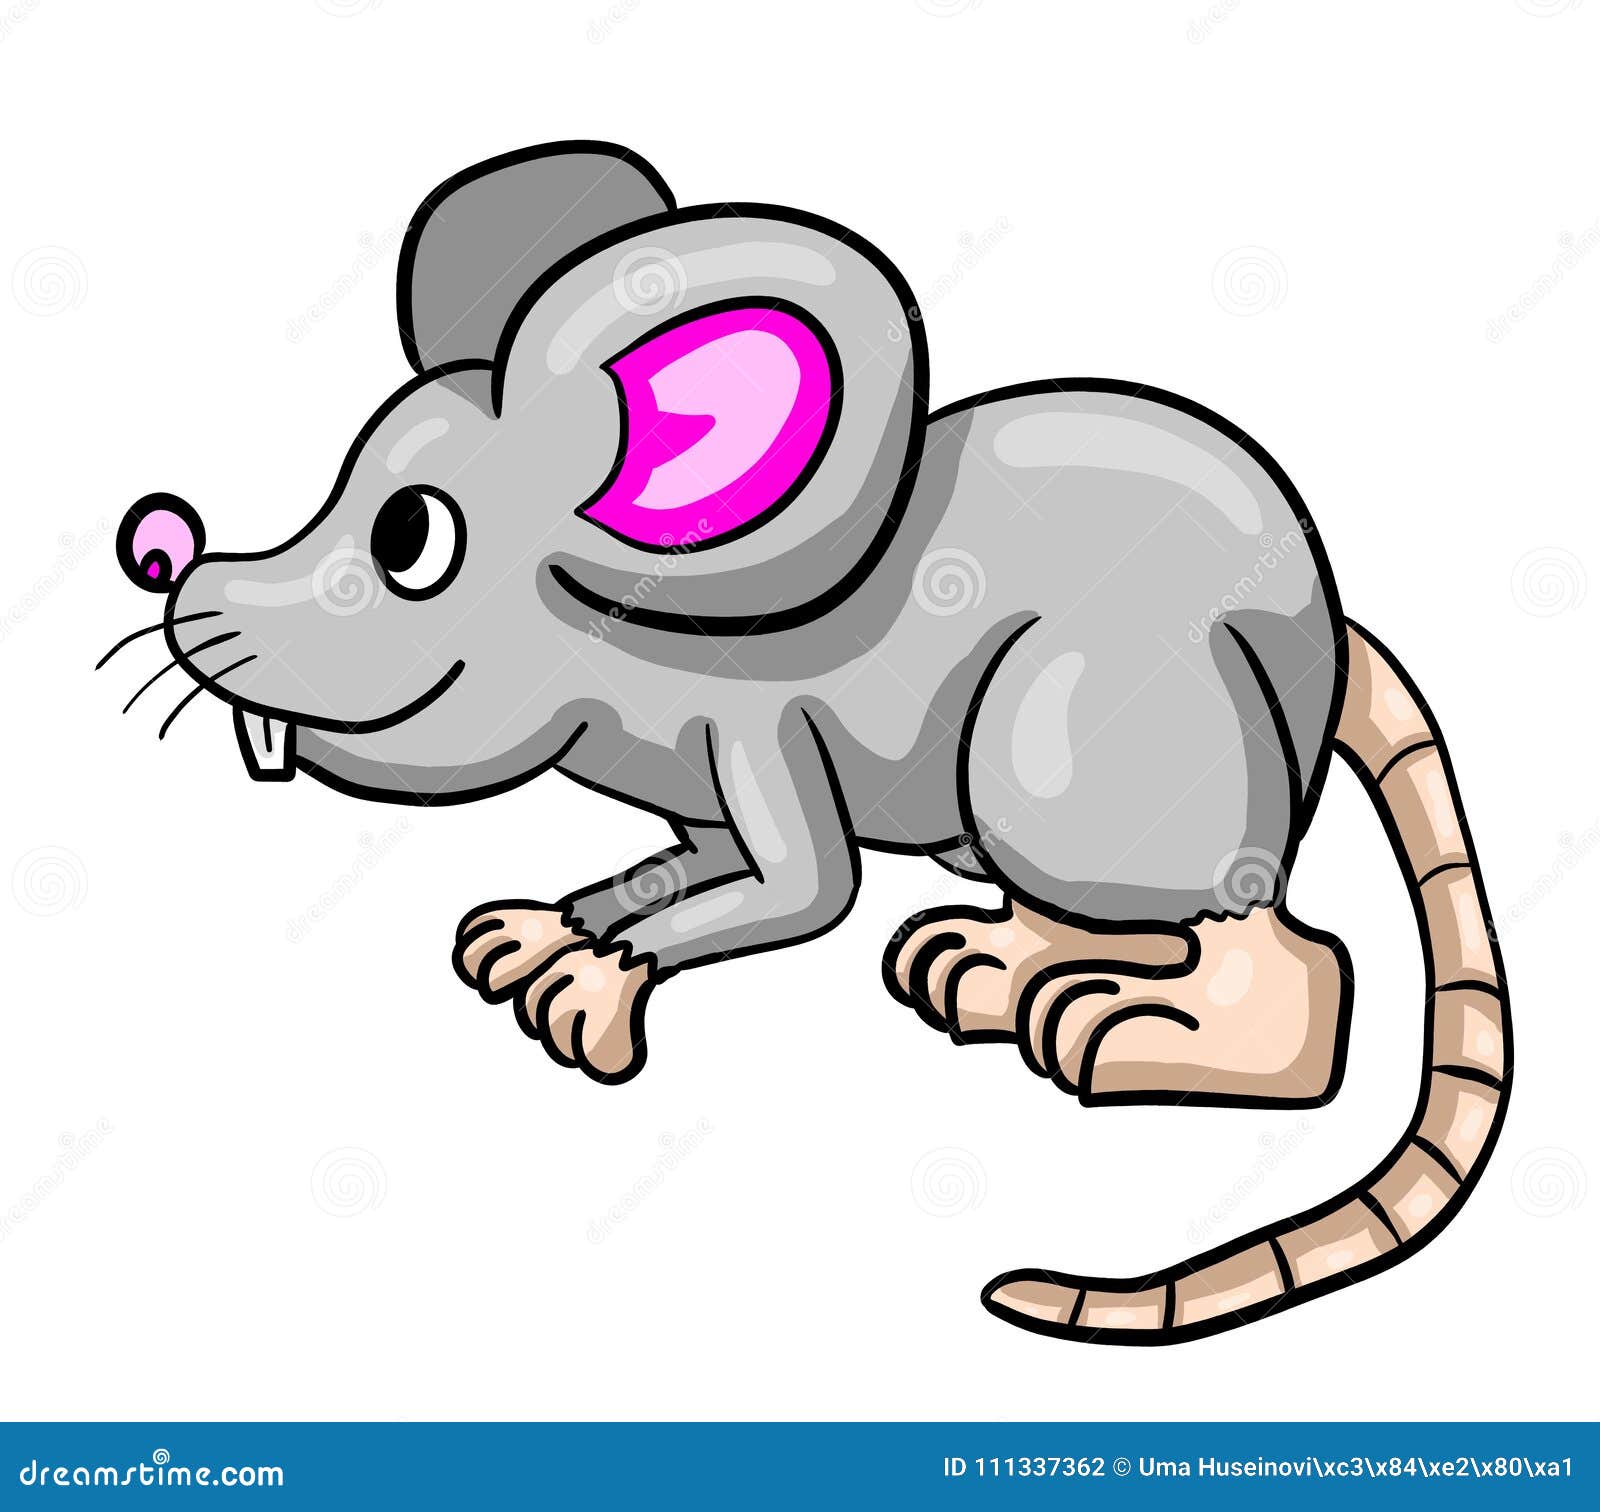 A Cute and Tiny Mouse stock illustration. Illustration of friendly -  111337362